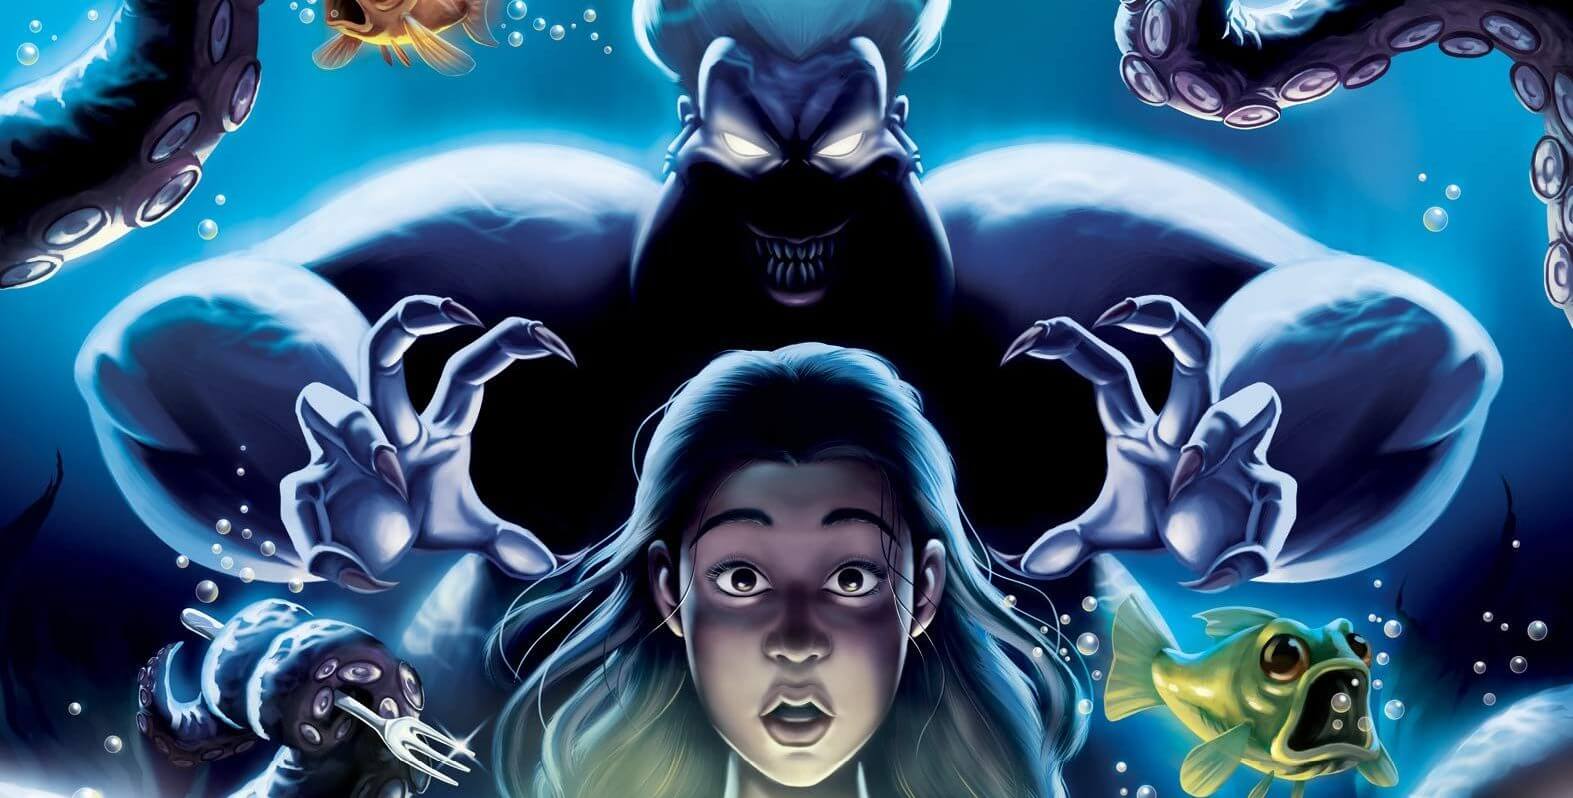 Disney Does Horror? The Company’s New Book Series Dares To Scare